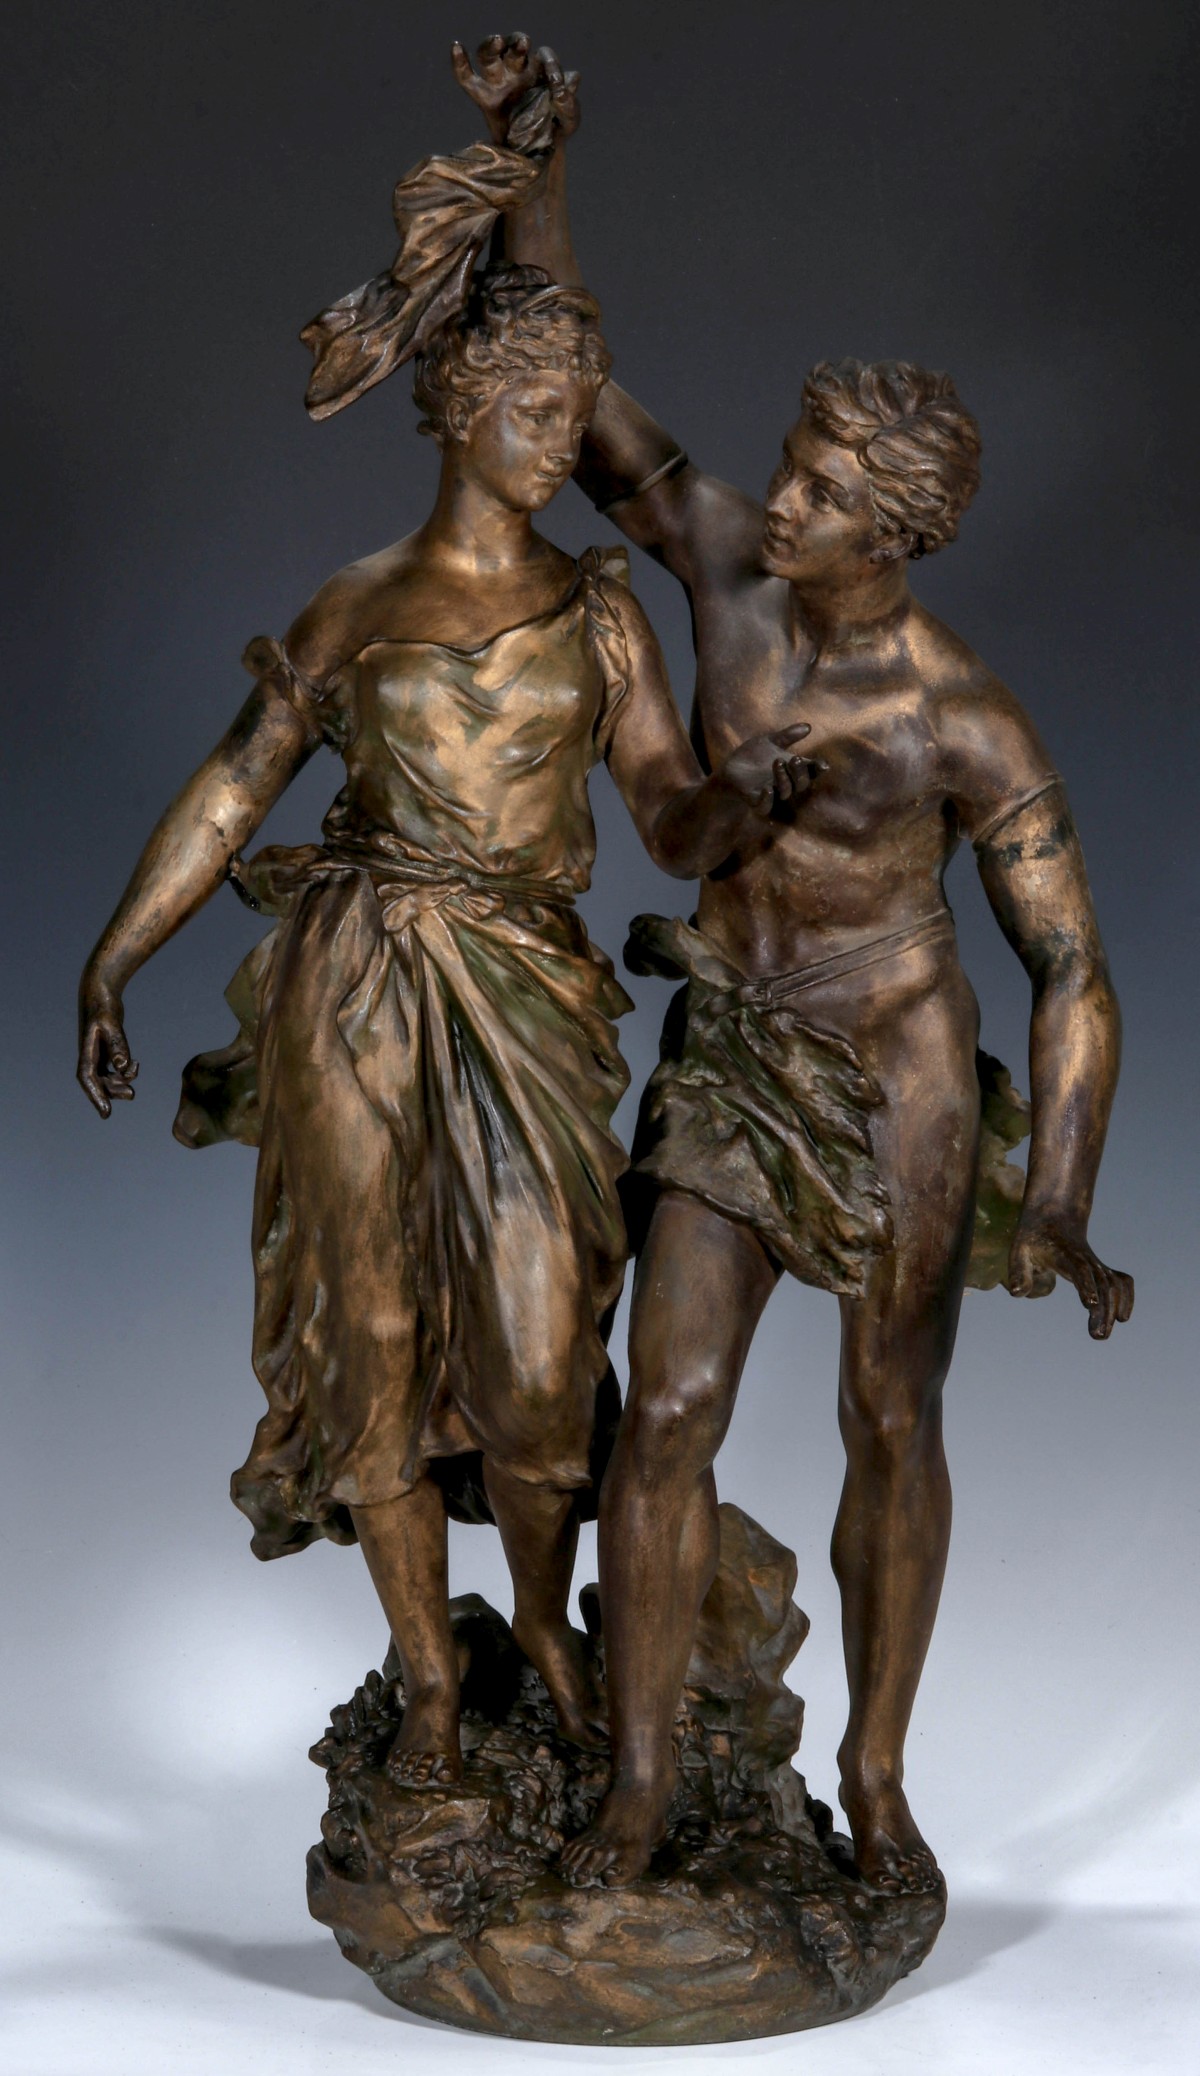 A 30-INCH VICTORIAN SPELTER